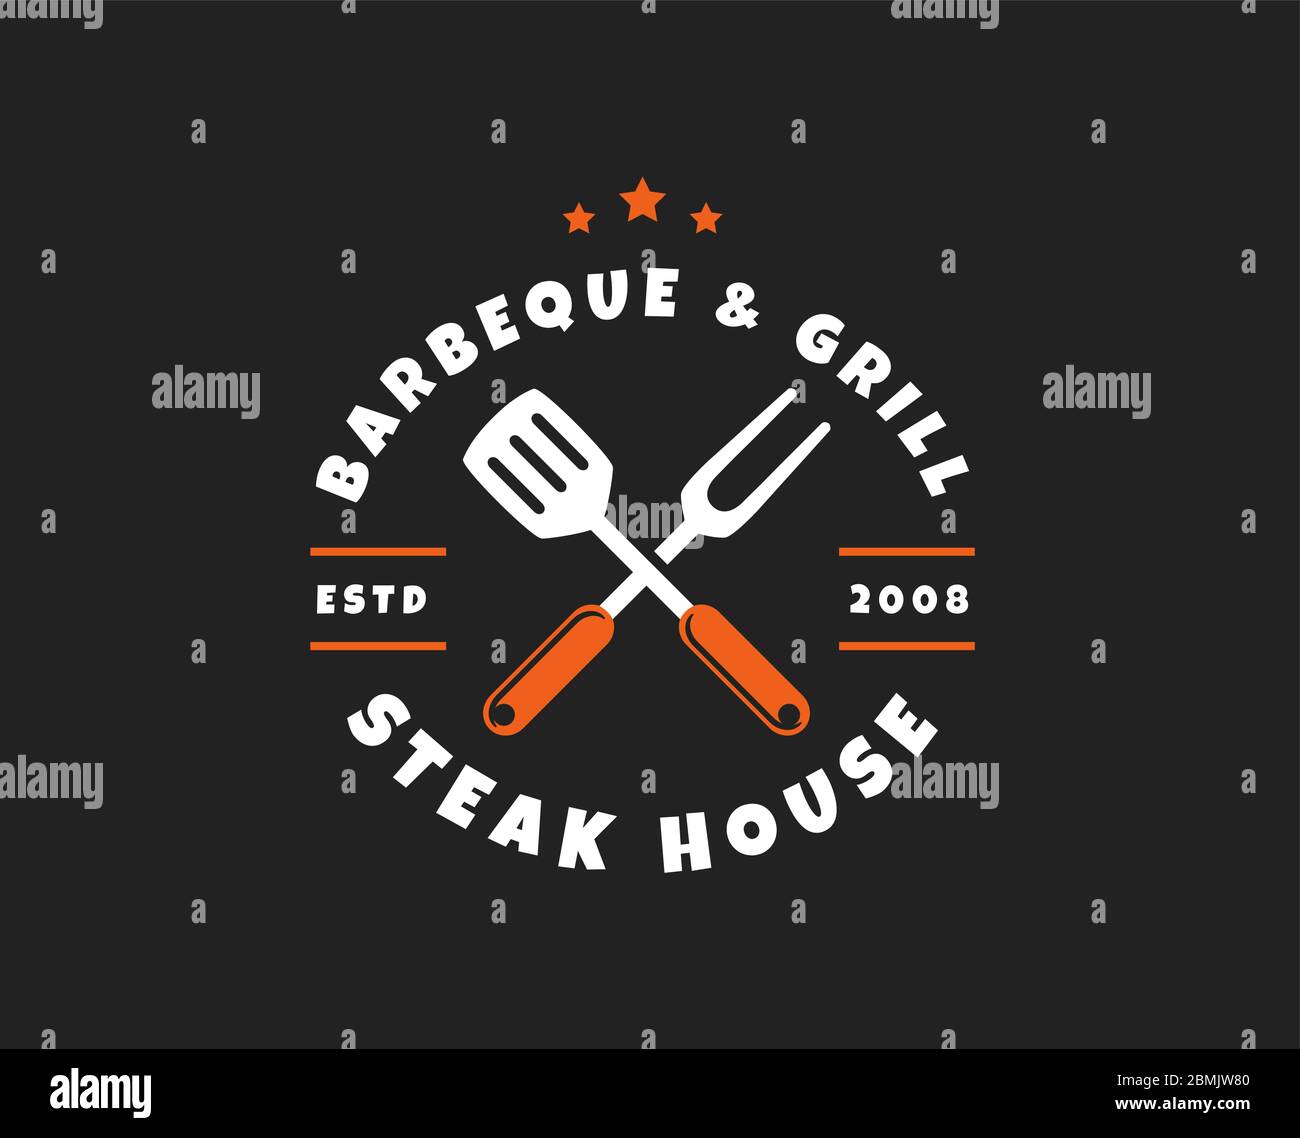 Barbecue and grill logo isolated on black background. Vector emblem for barbecue restaurant or steak house. Stock Vector